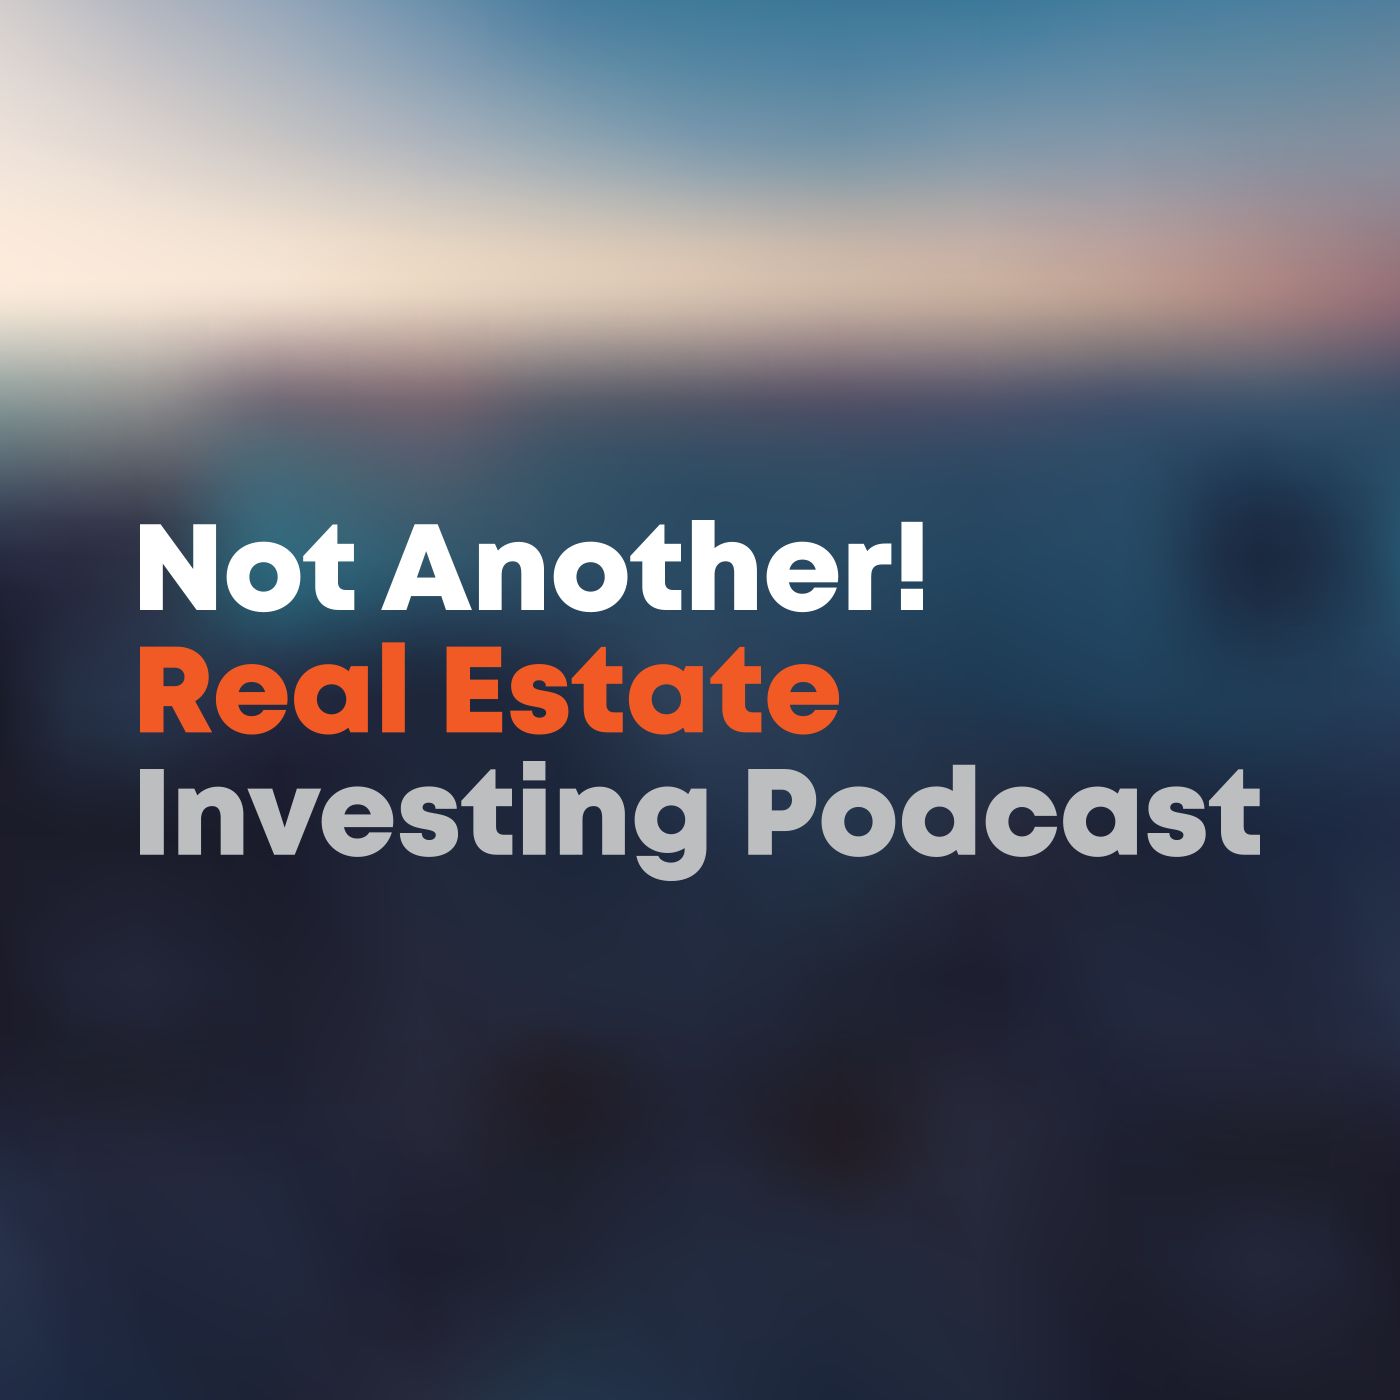 Not Another! Real Estate Investing Podcast